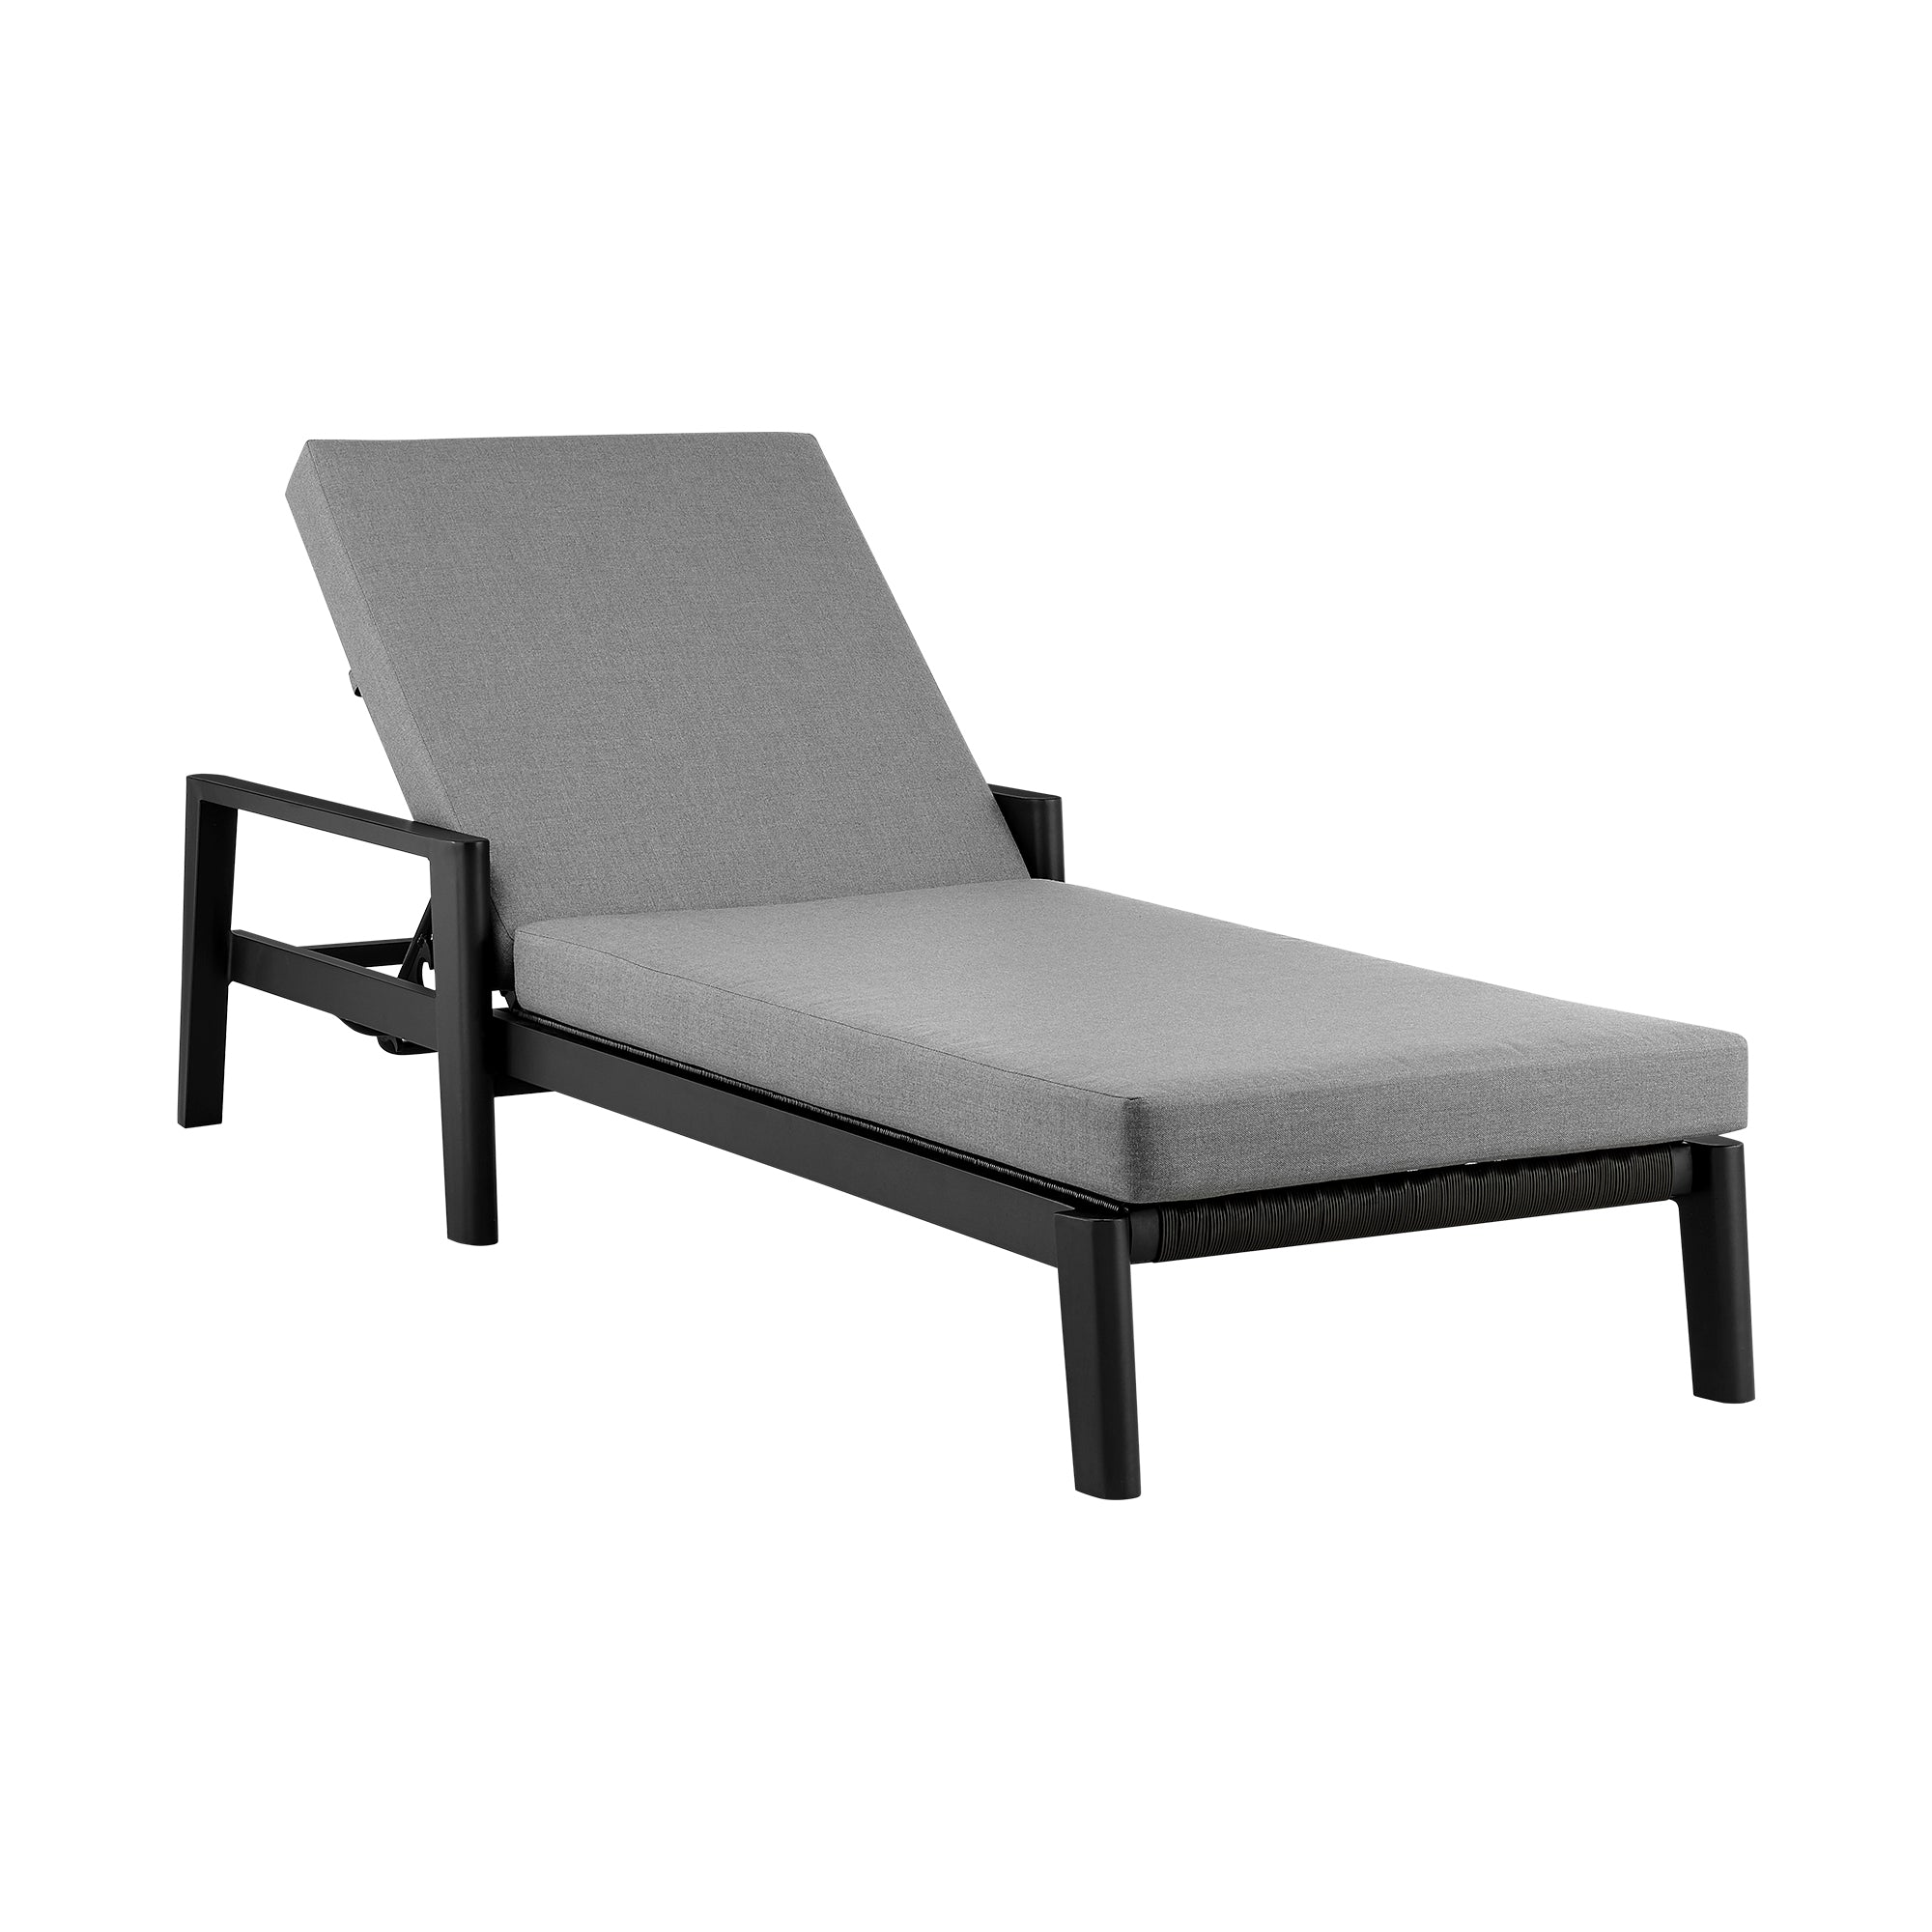 Armen Living - Grand Outdoor Patio Adjustable Chaise Lounge Chair in Aluminum with Grey Cushions - 840254332713